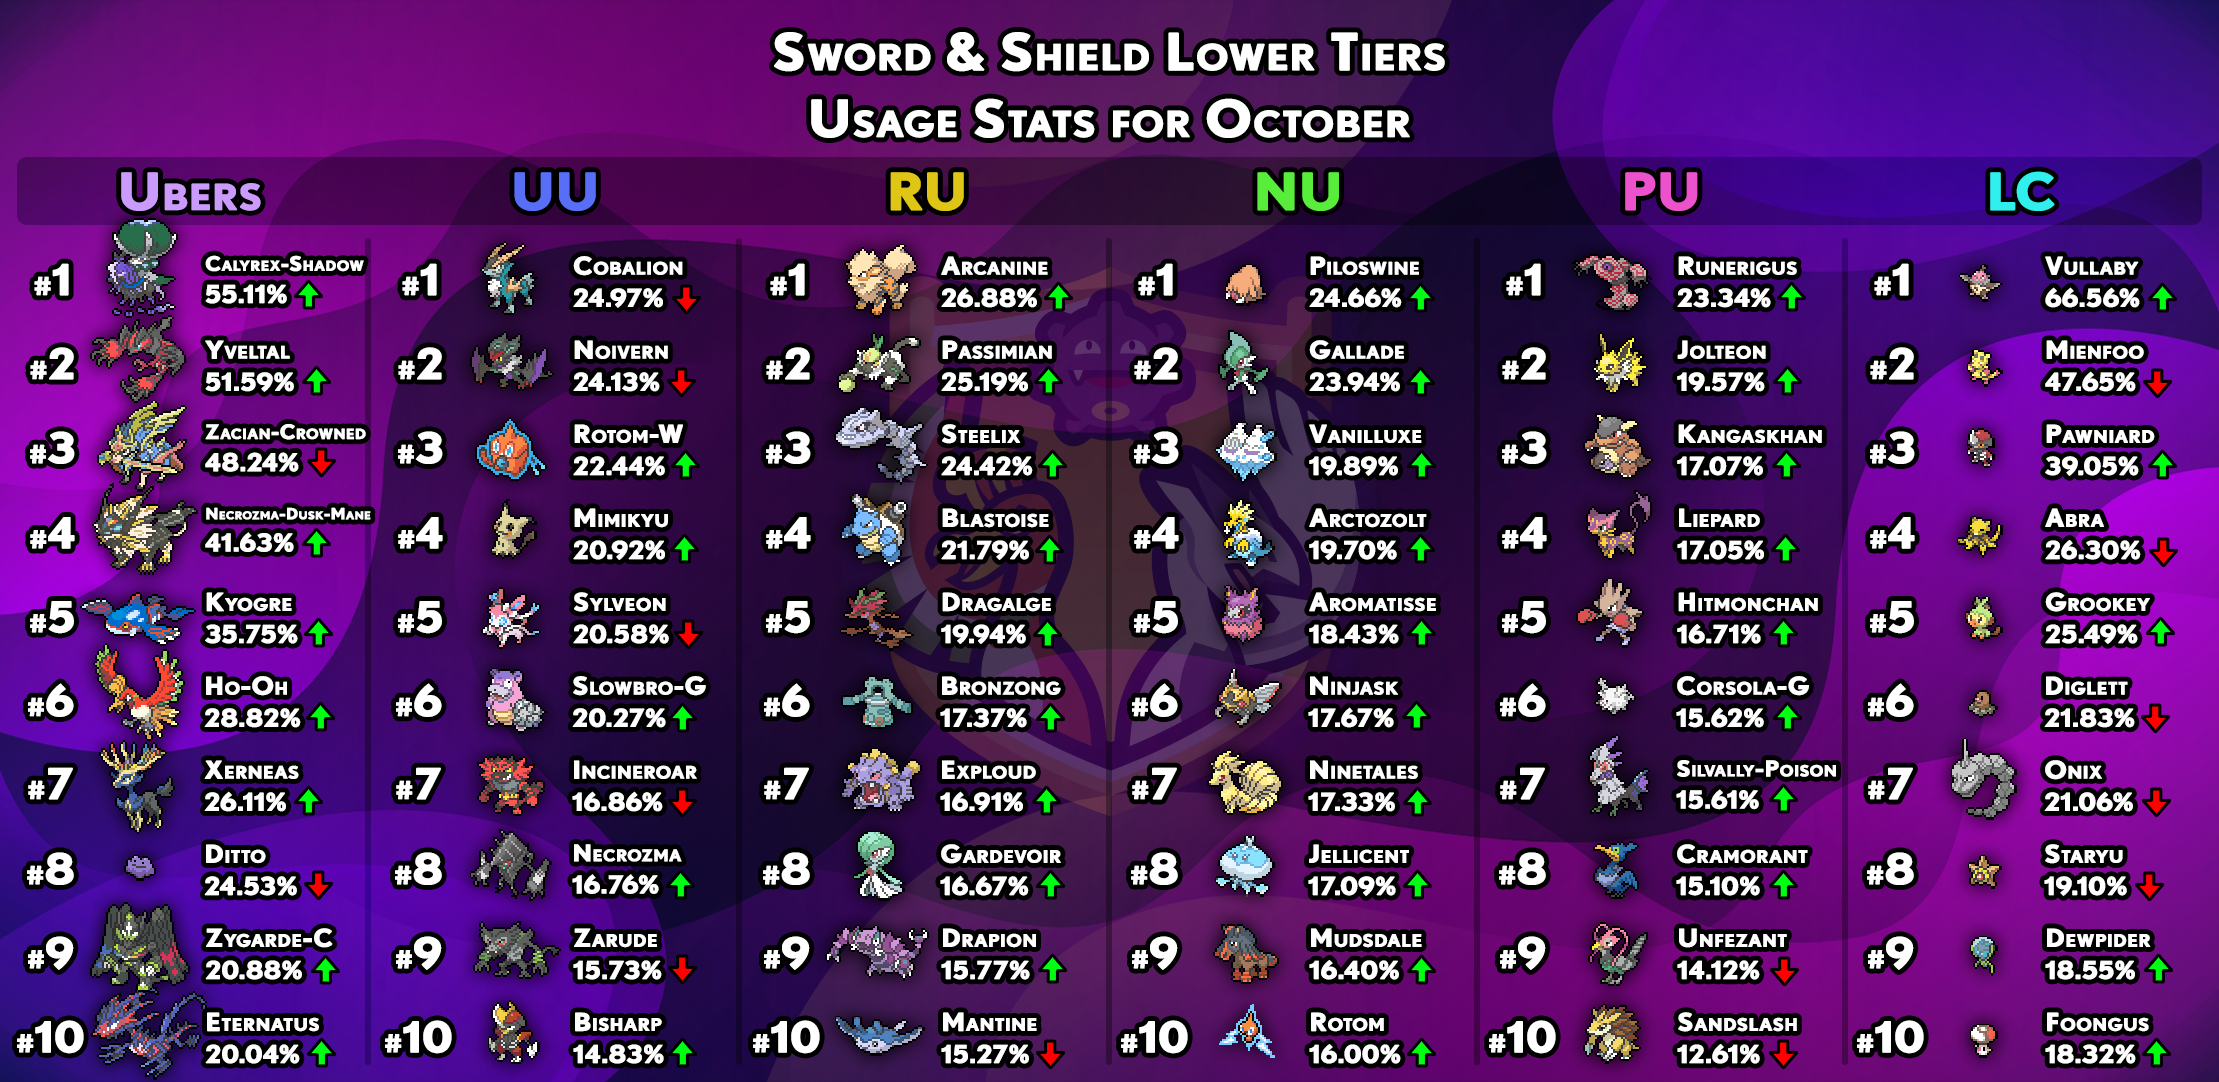 usagestats-gen8-other-tiers-october.png